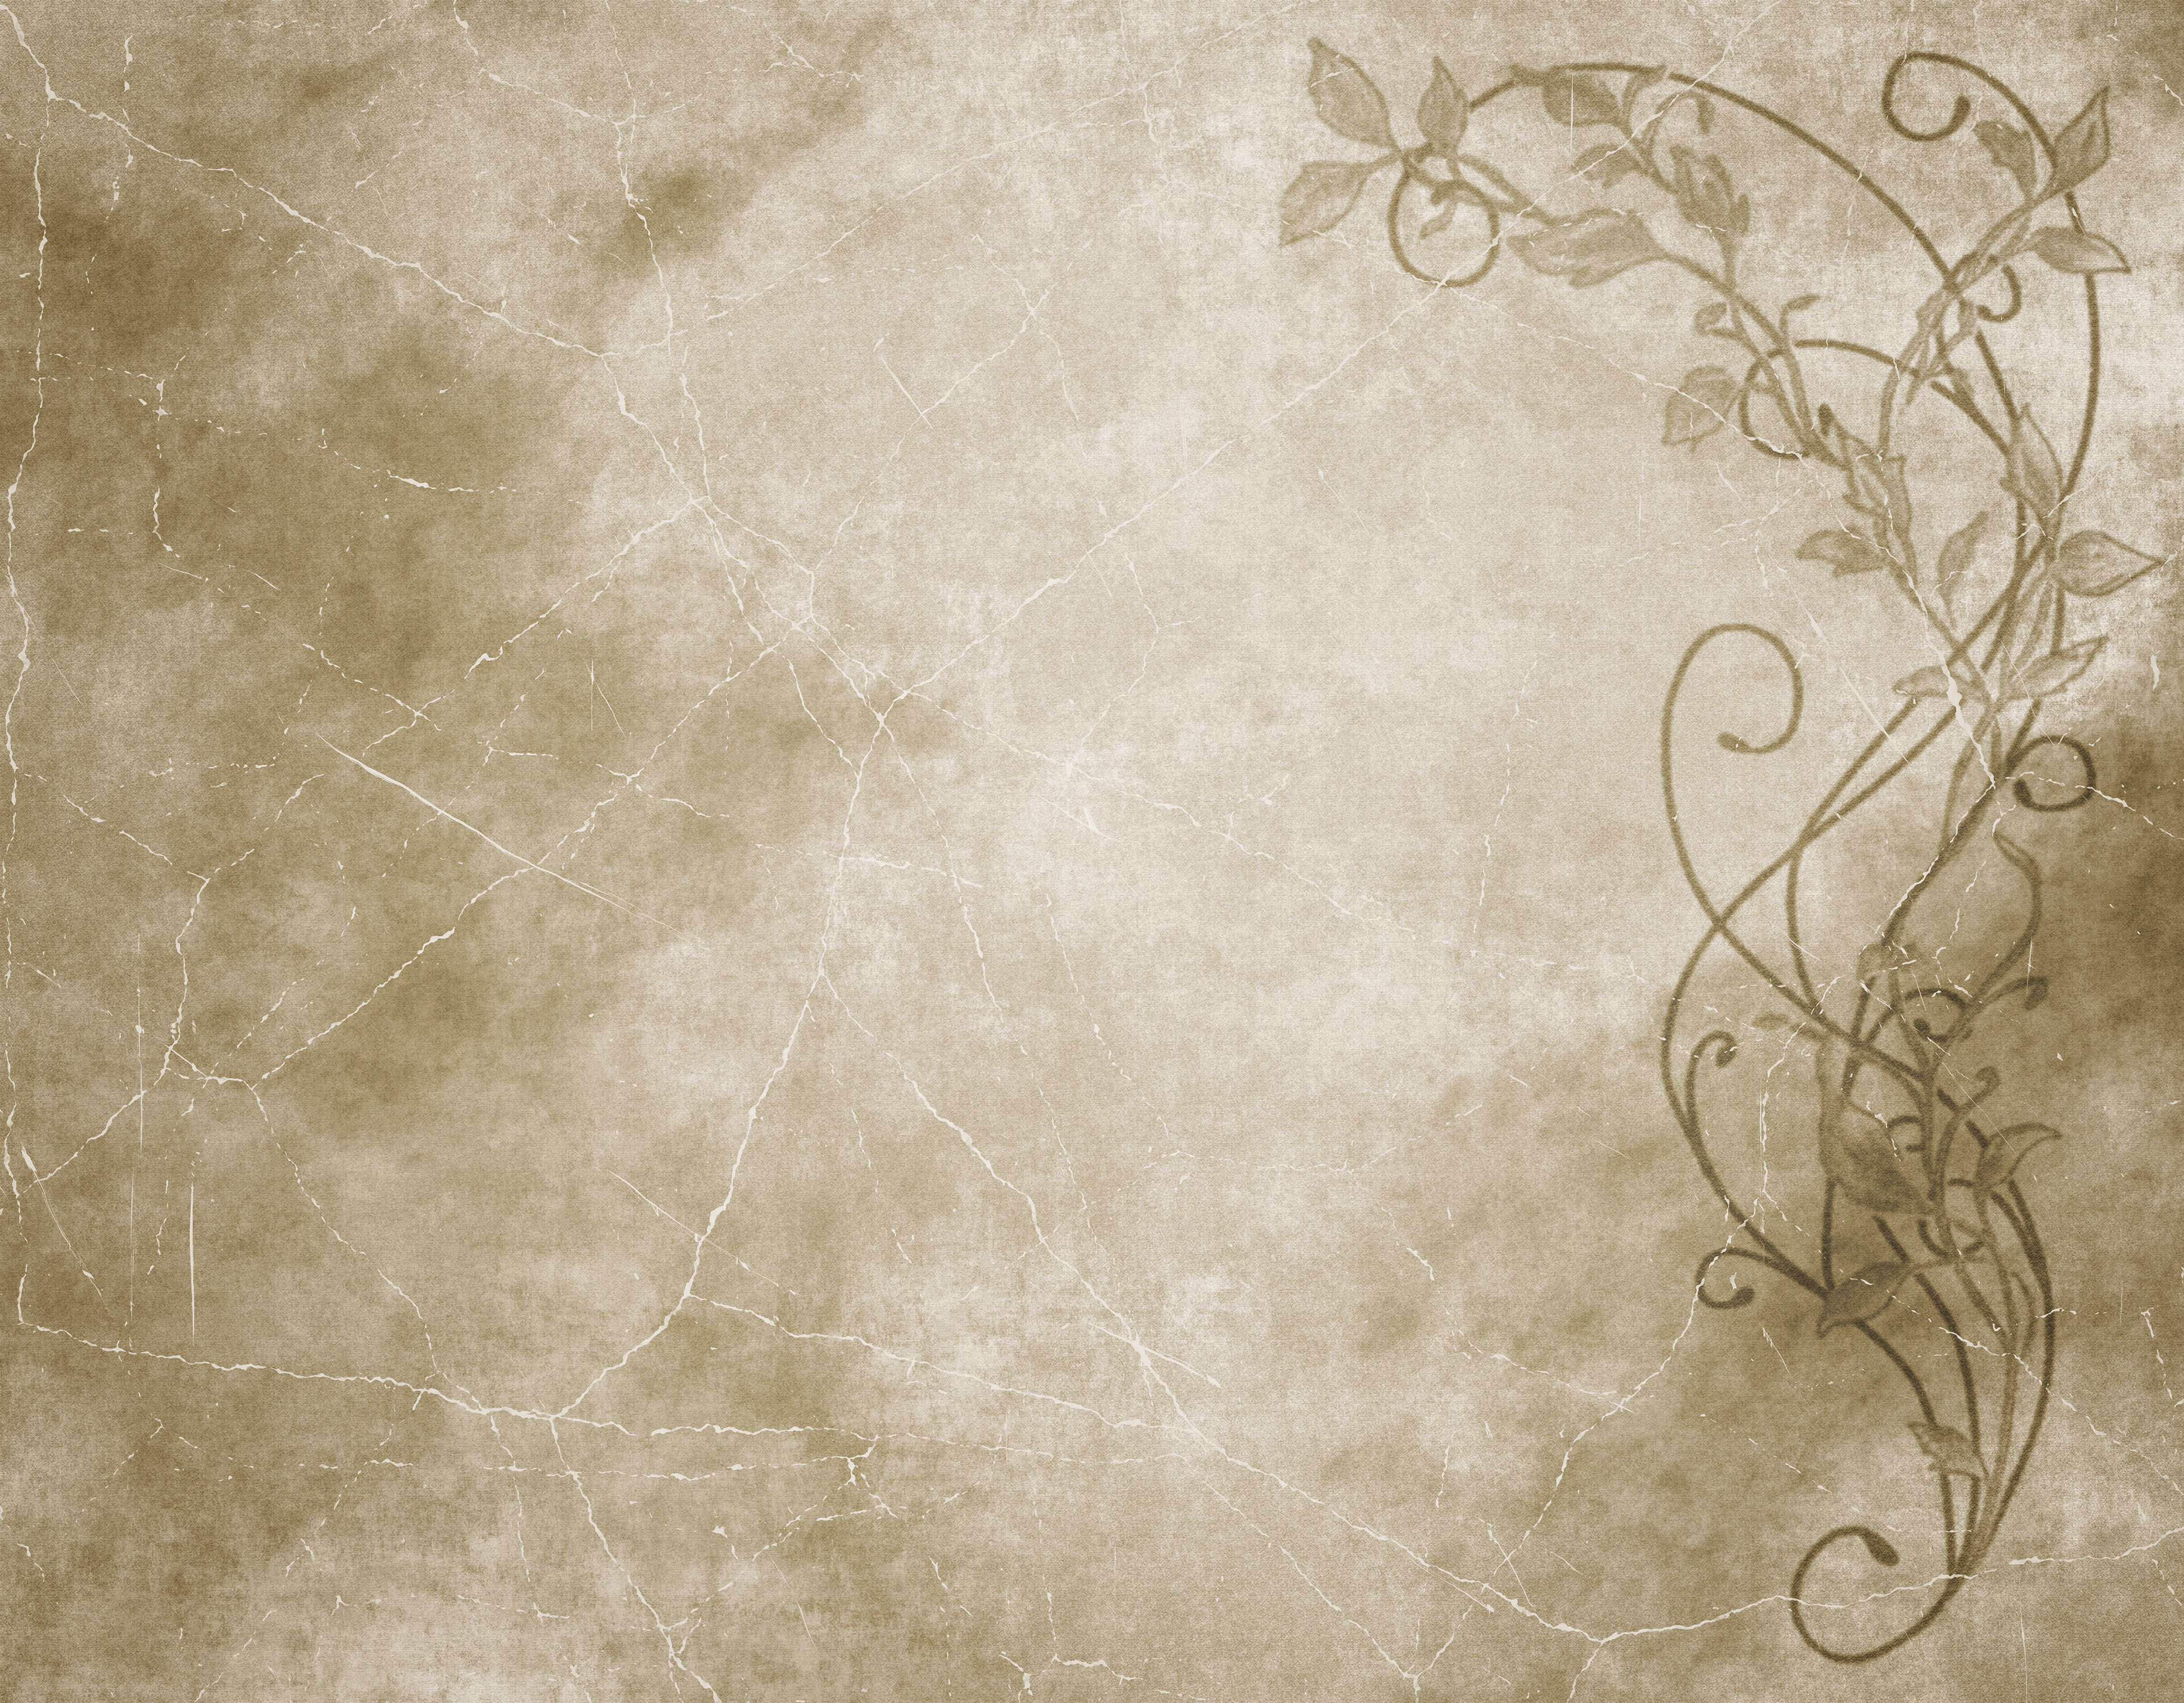 Old Paper Floral Parchment Background Image Of